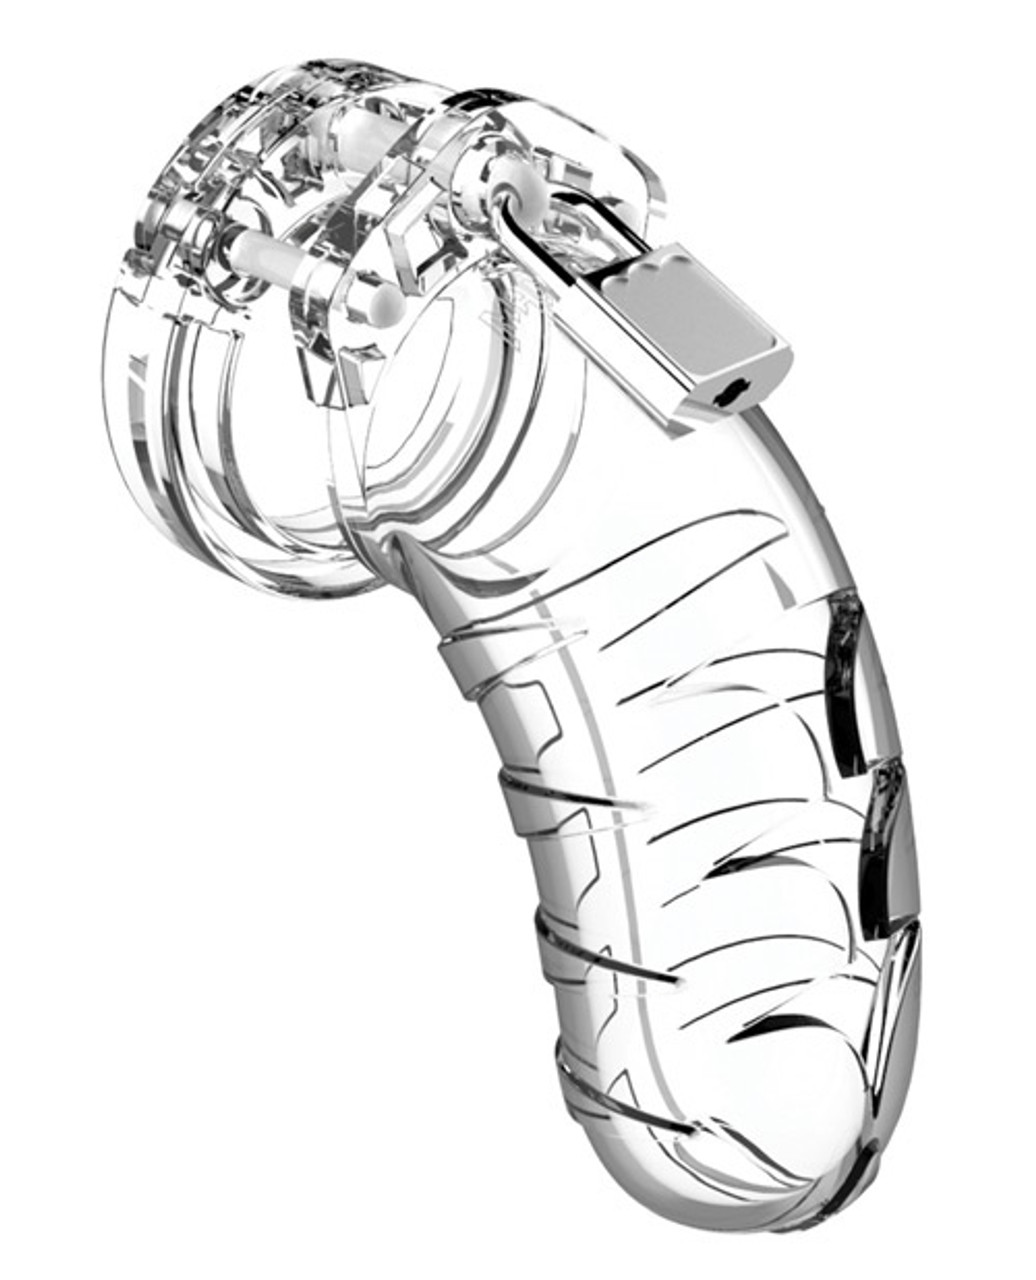 Man Cage Male Chastity Device - Model 04